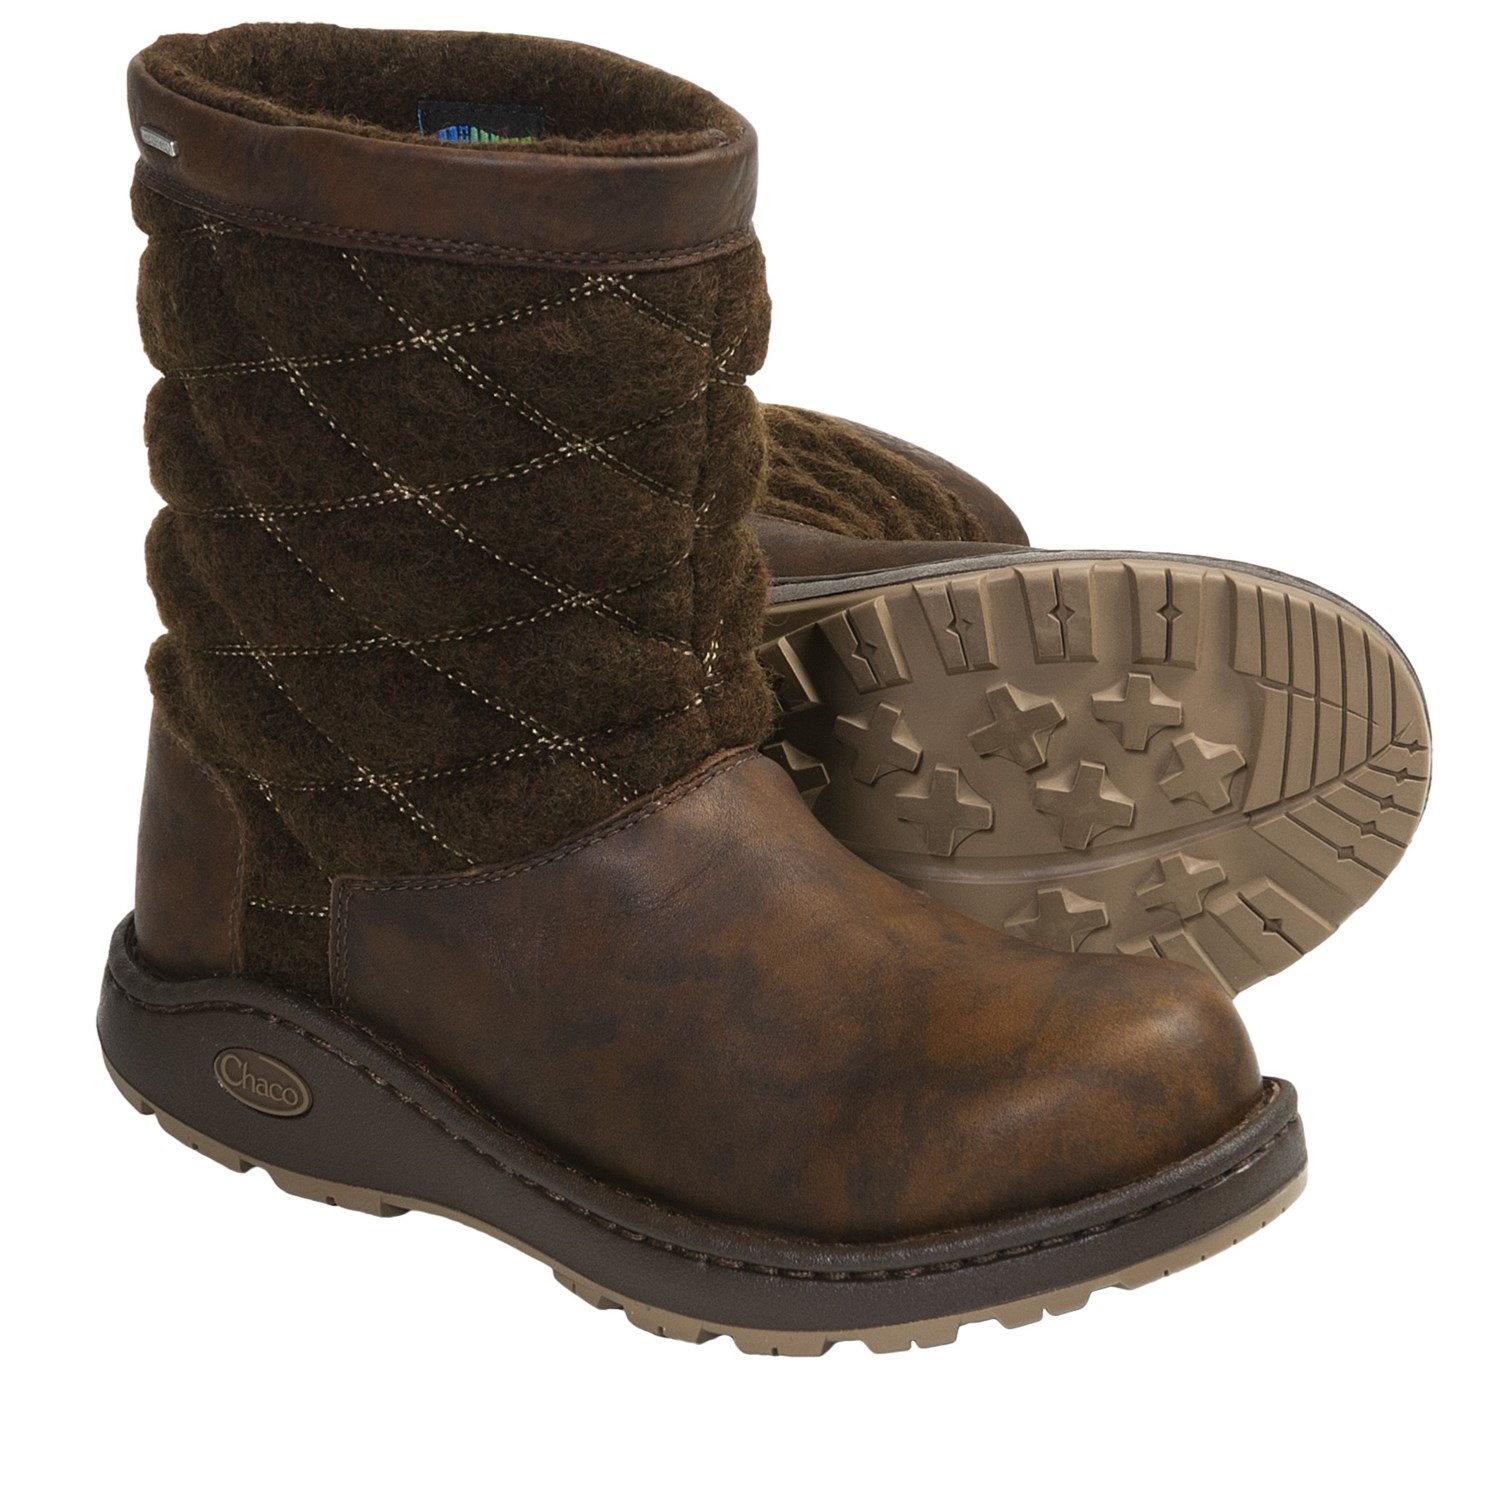 Chaco Arbora Boots (For Women) 4915P - Save 50%